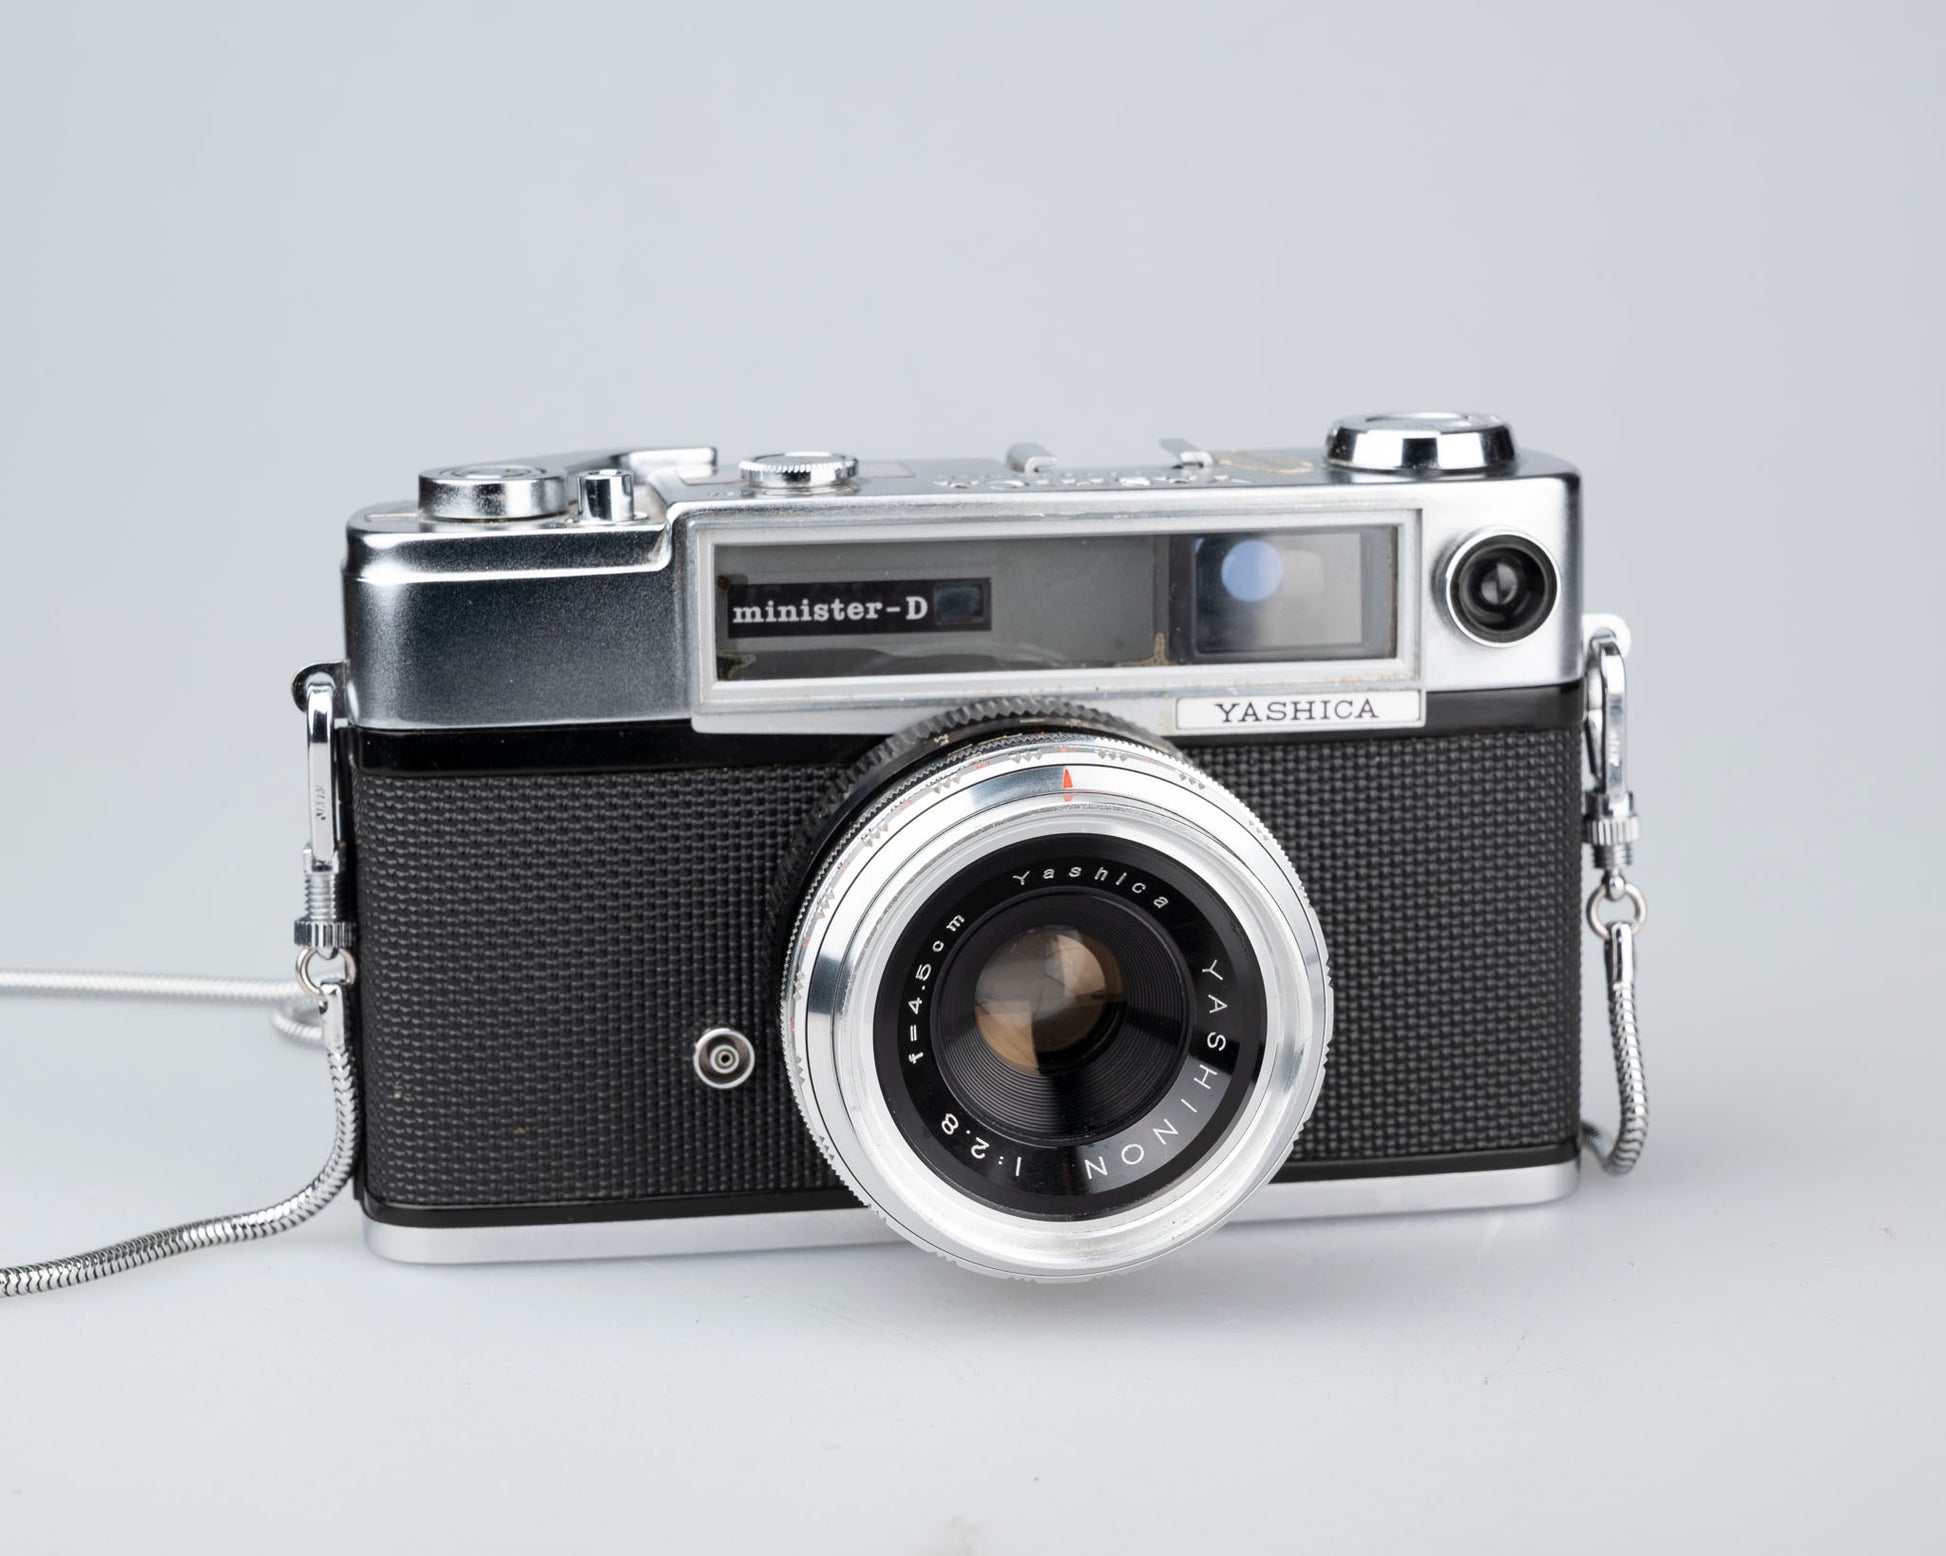 The Yashica Minister-D is classic 35mm rangefinder. This film-tested camera is available at www.newwavepool.shop